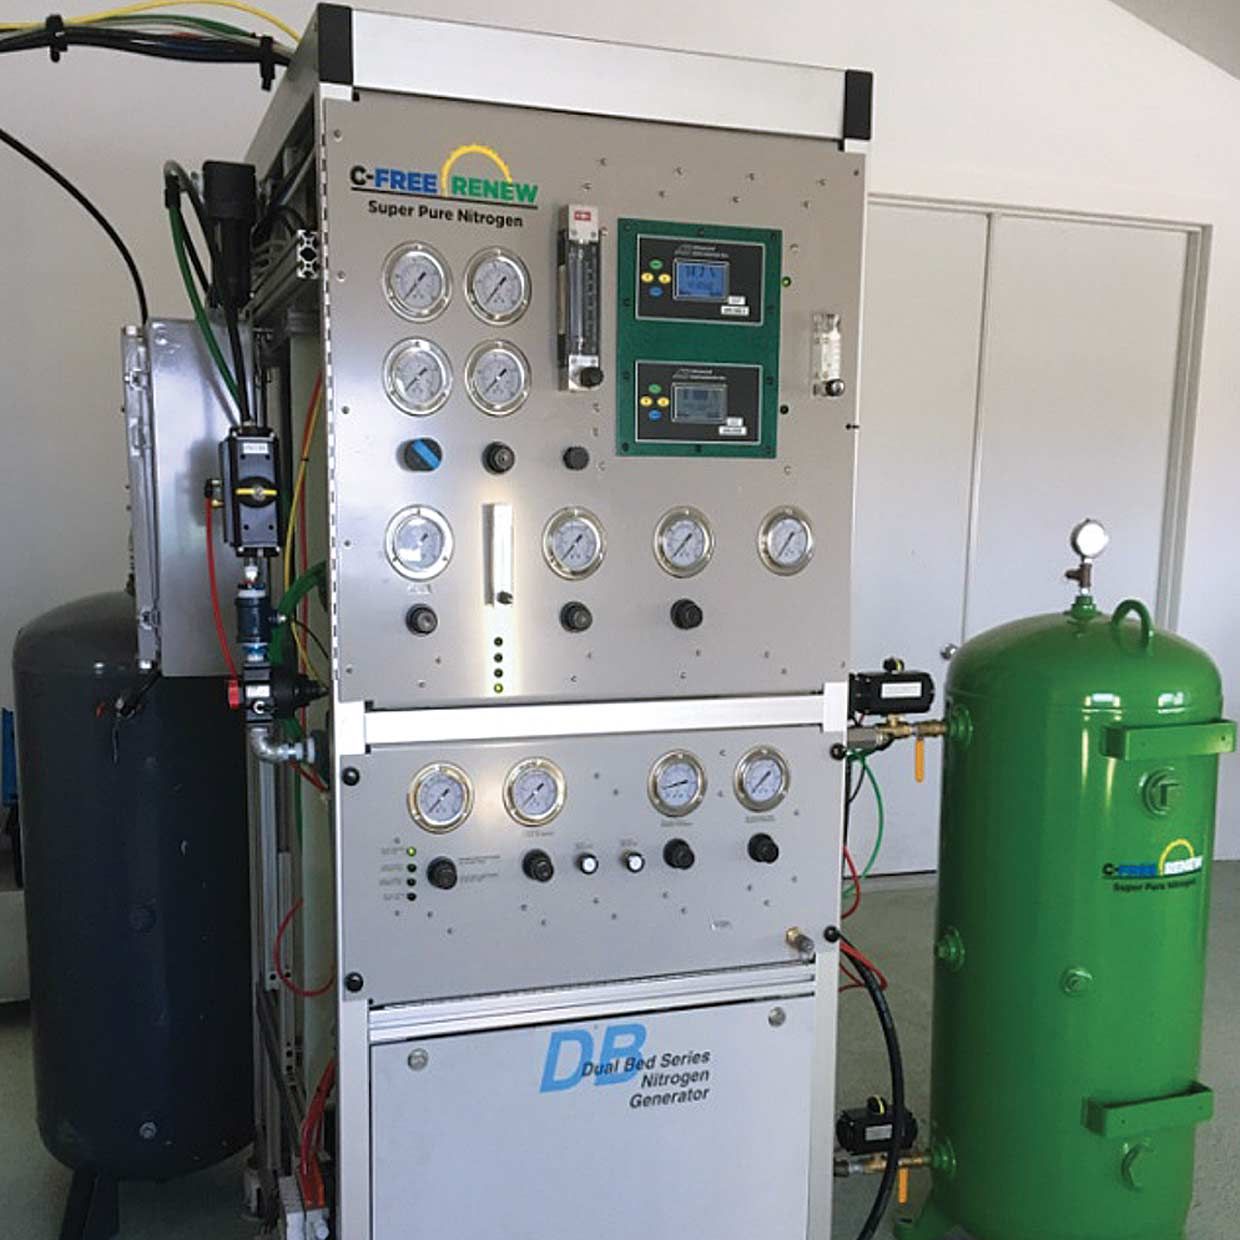 The nitrogen generator is key to reducing the amount of oxygen in the air mixture and making the nitrogen pure enough to be used for fuel.